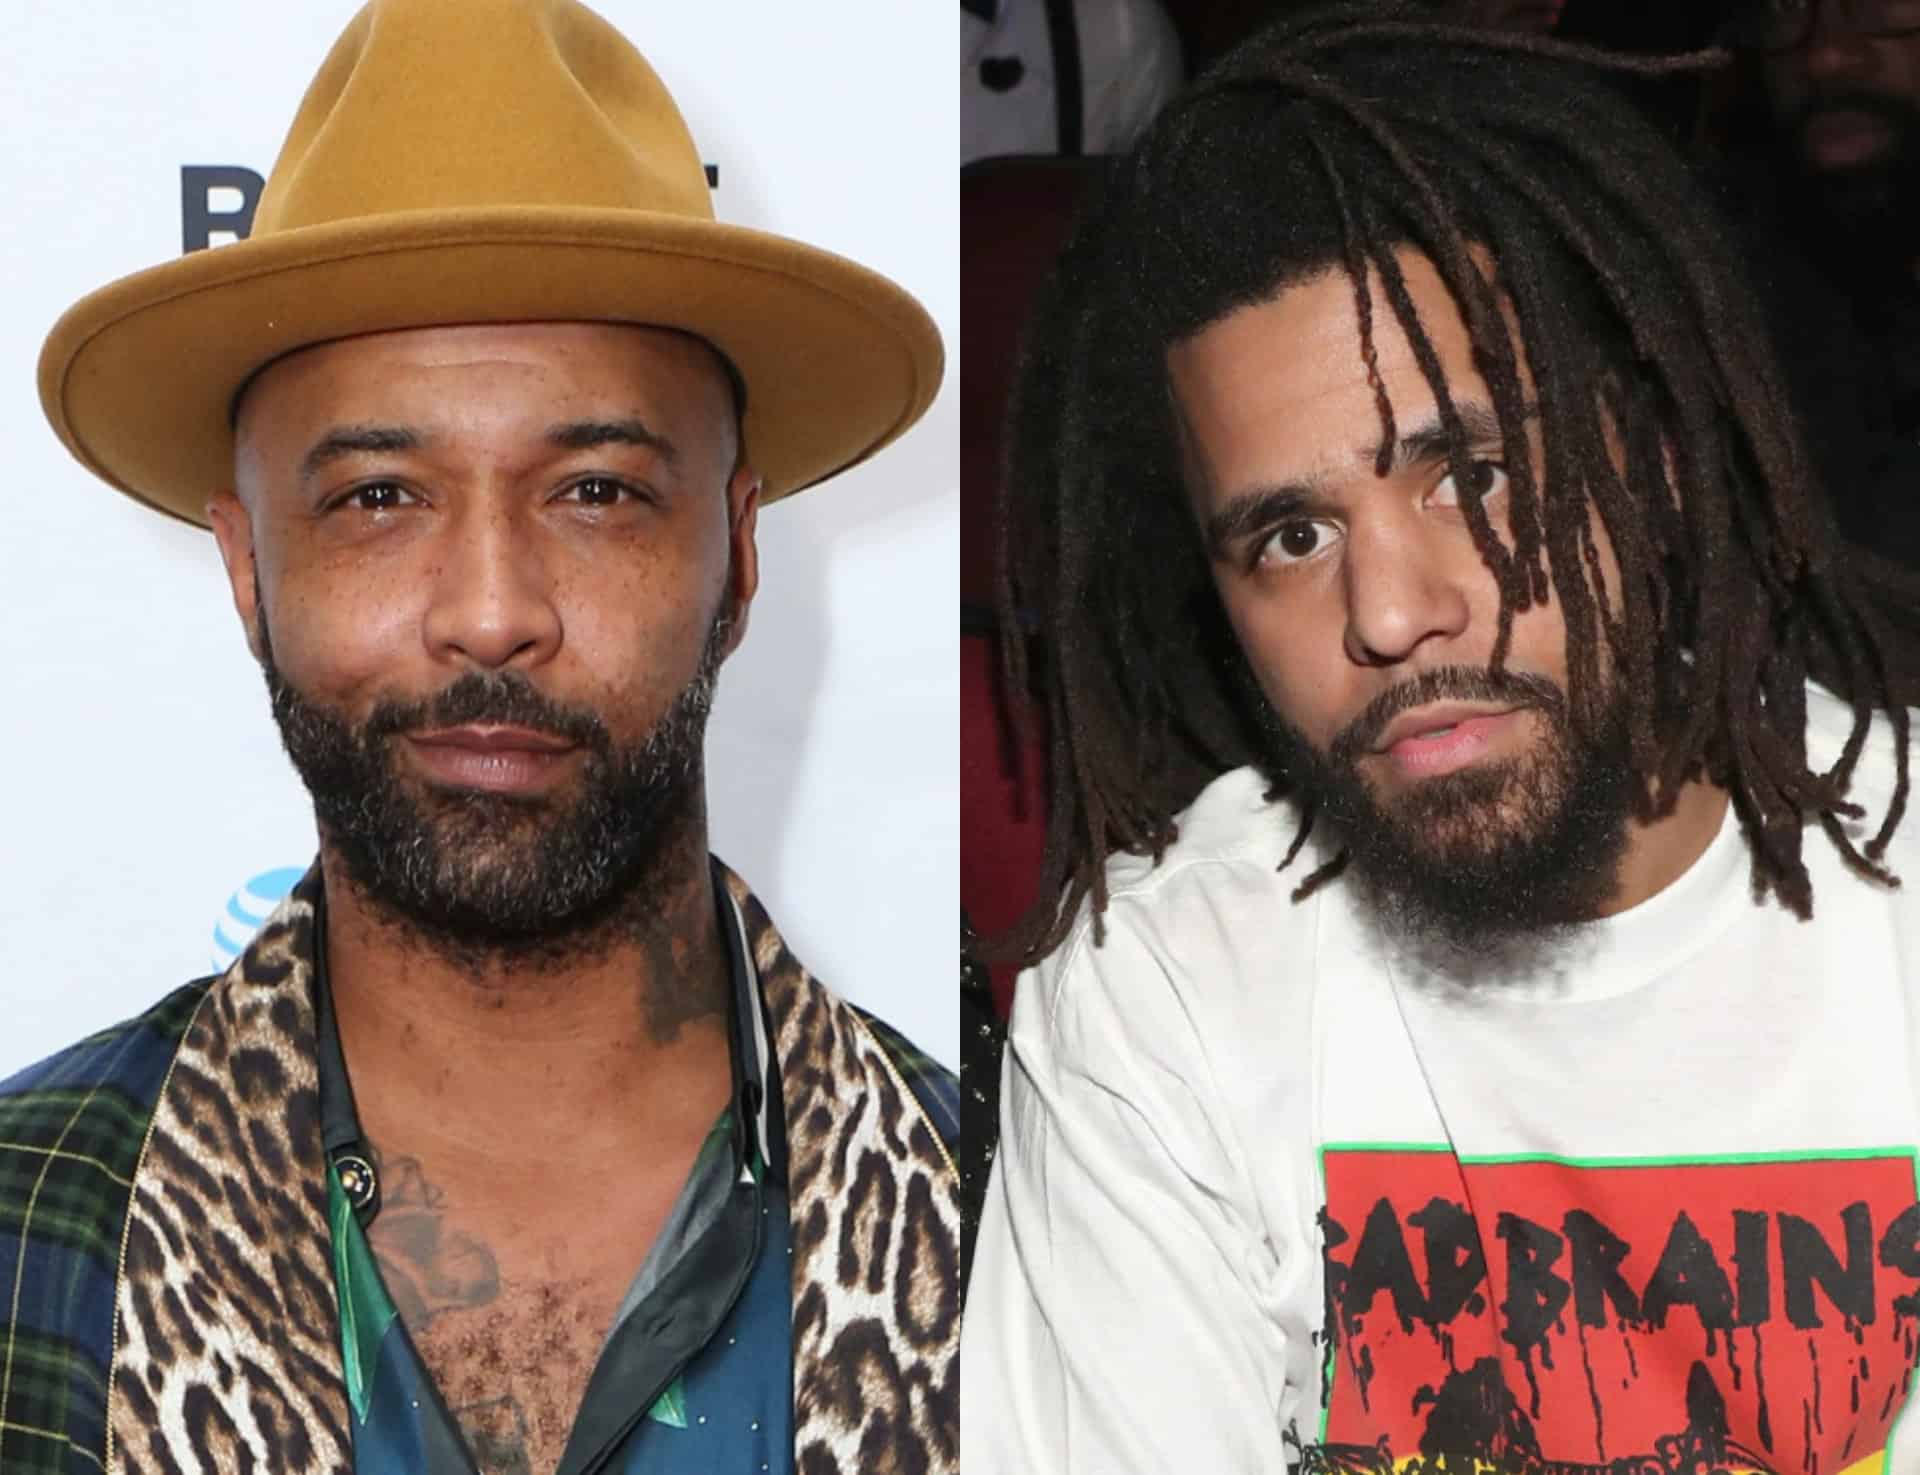 Joe Budden Tells J. Cole To Stay Away From Street Rappers: "I Don't Want To Hear It"